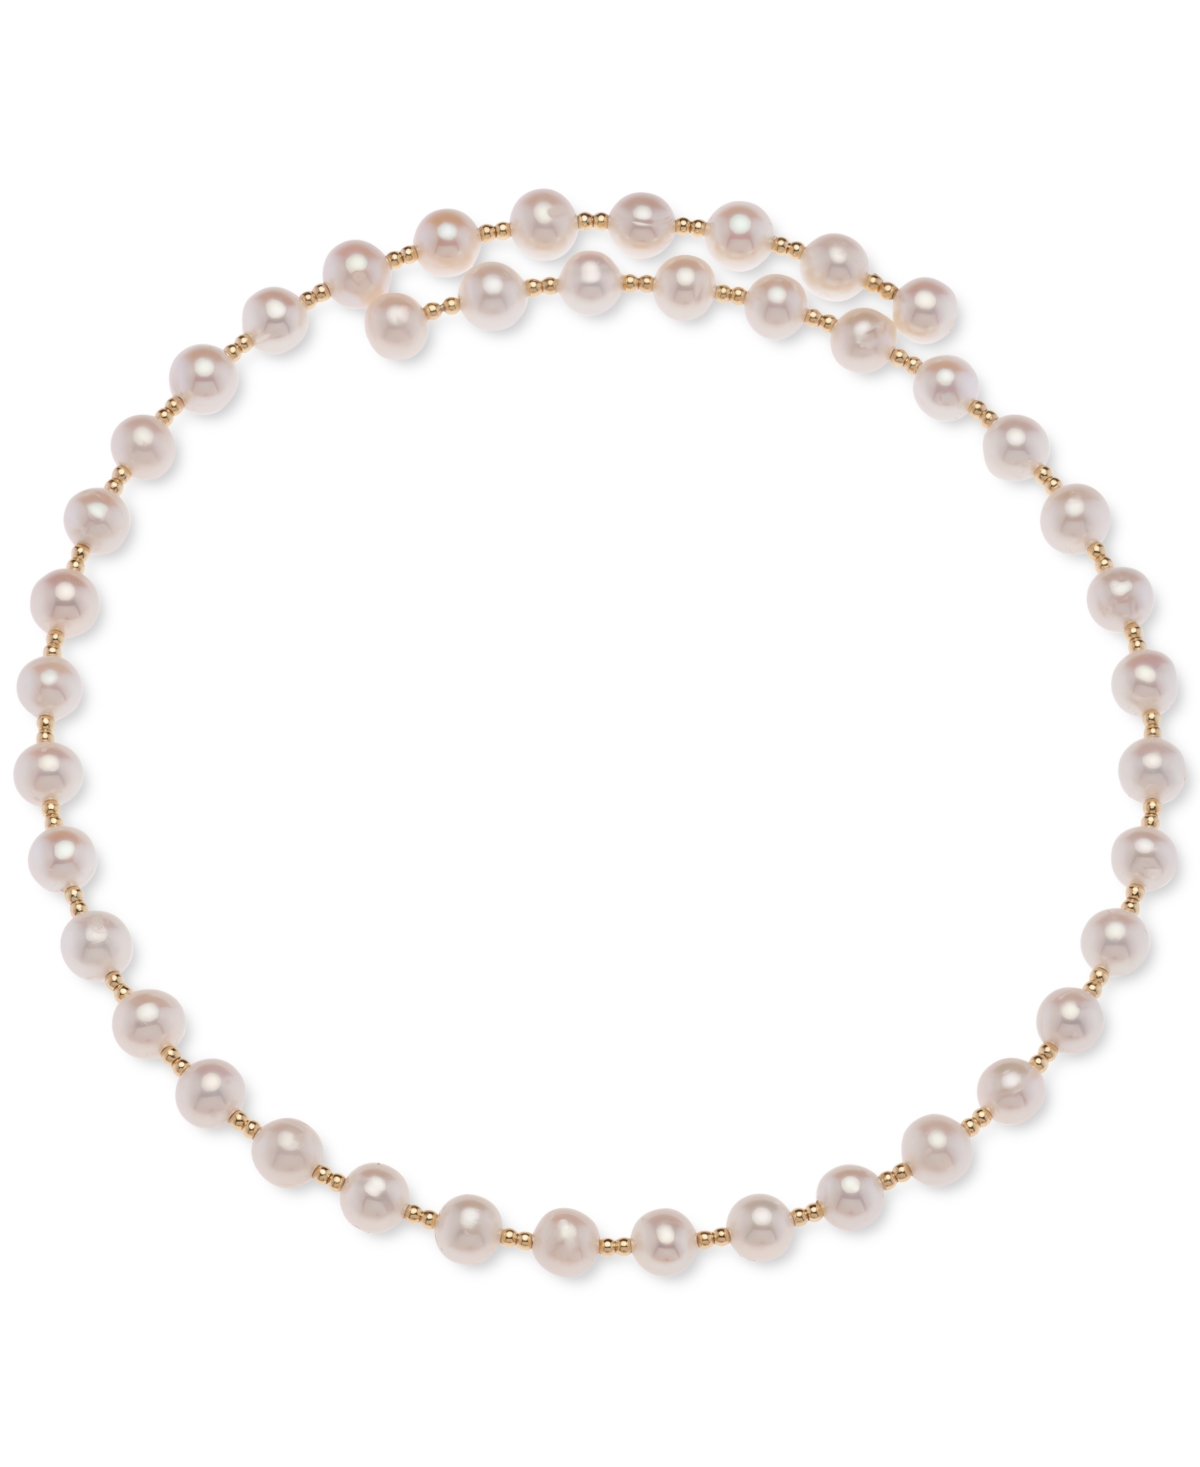 Cultured Freshwater Pearl (6-1/2 - 7mm) & Polished Bead Coil 14-1/2" Choker Necklace in 18k Gold-Plated Sterling Silver - Gold